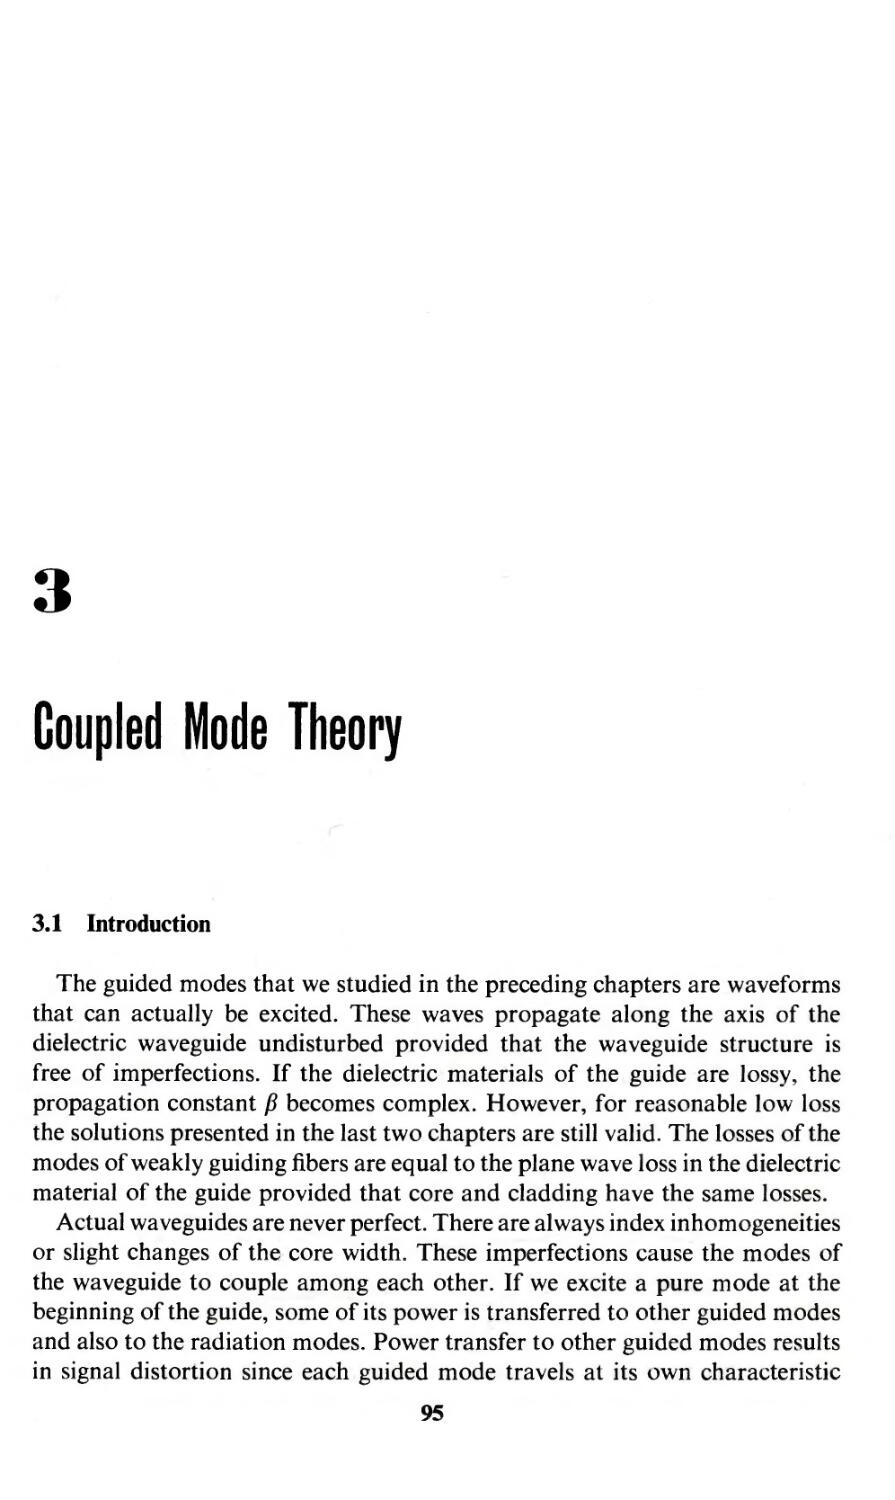 Chapter 3. Coupled Mode Theory
Coupled mode theory, 95-131